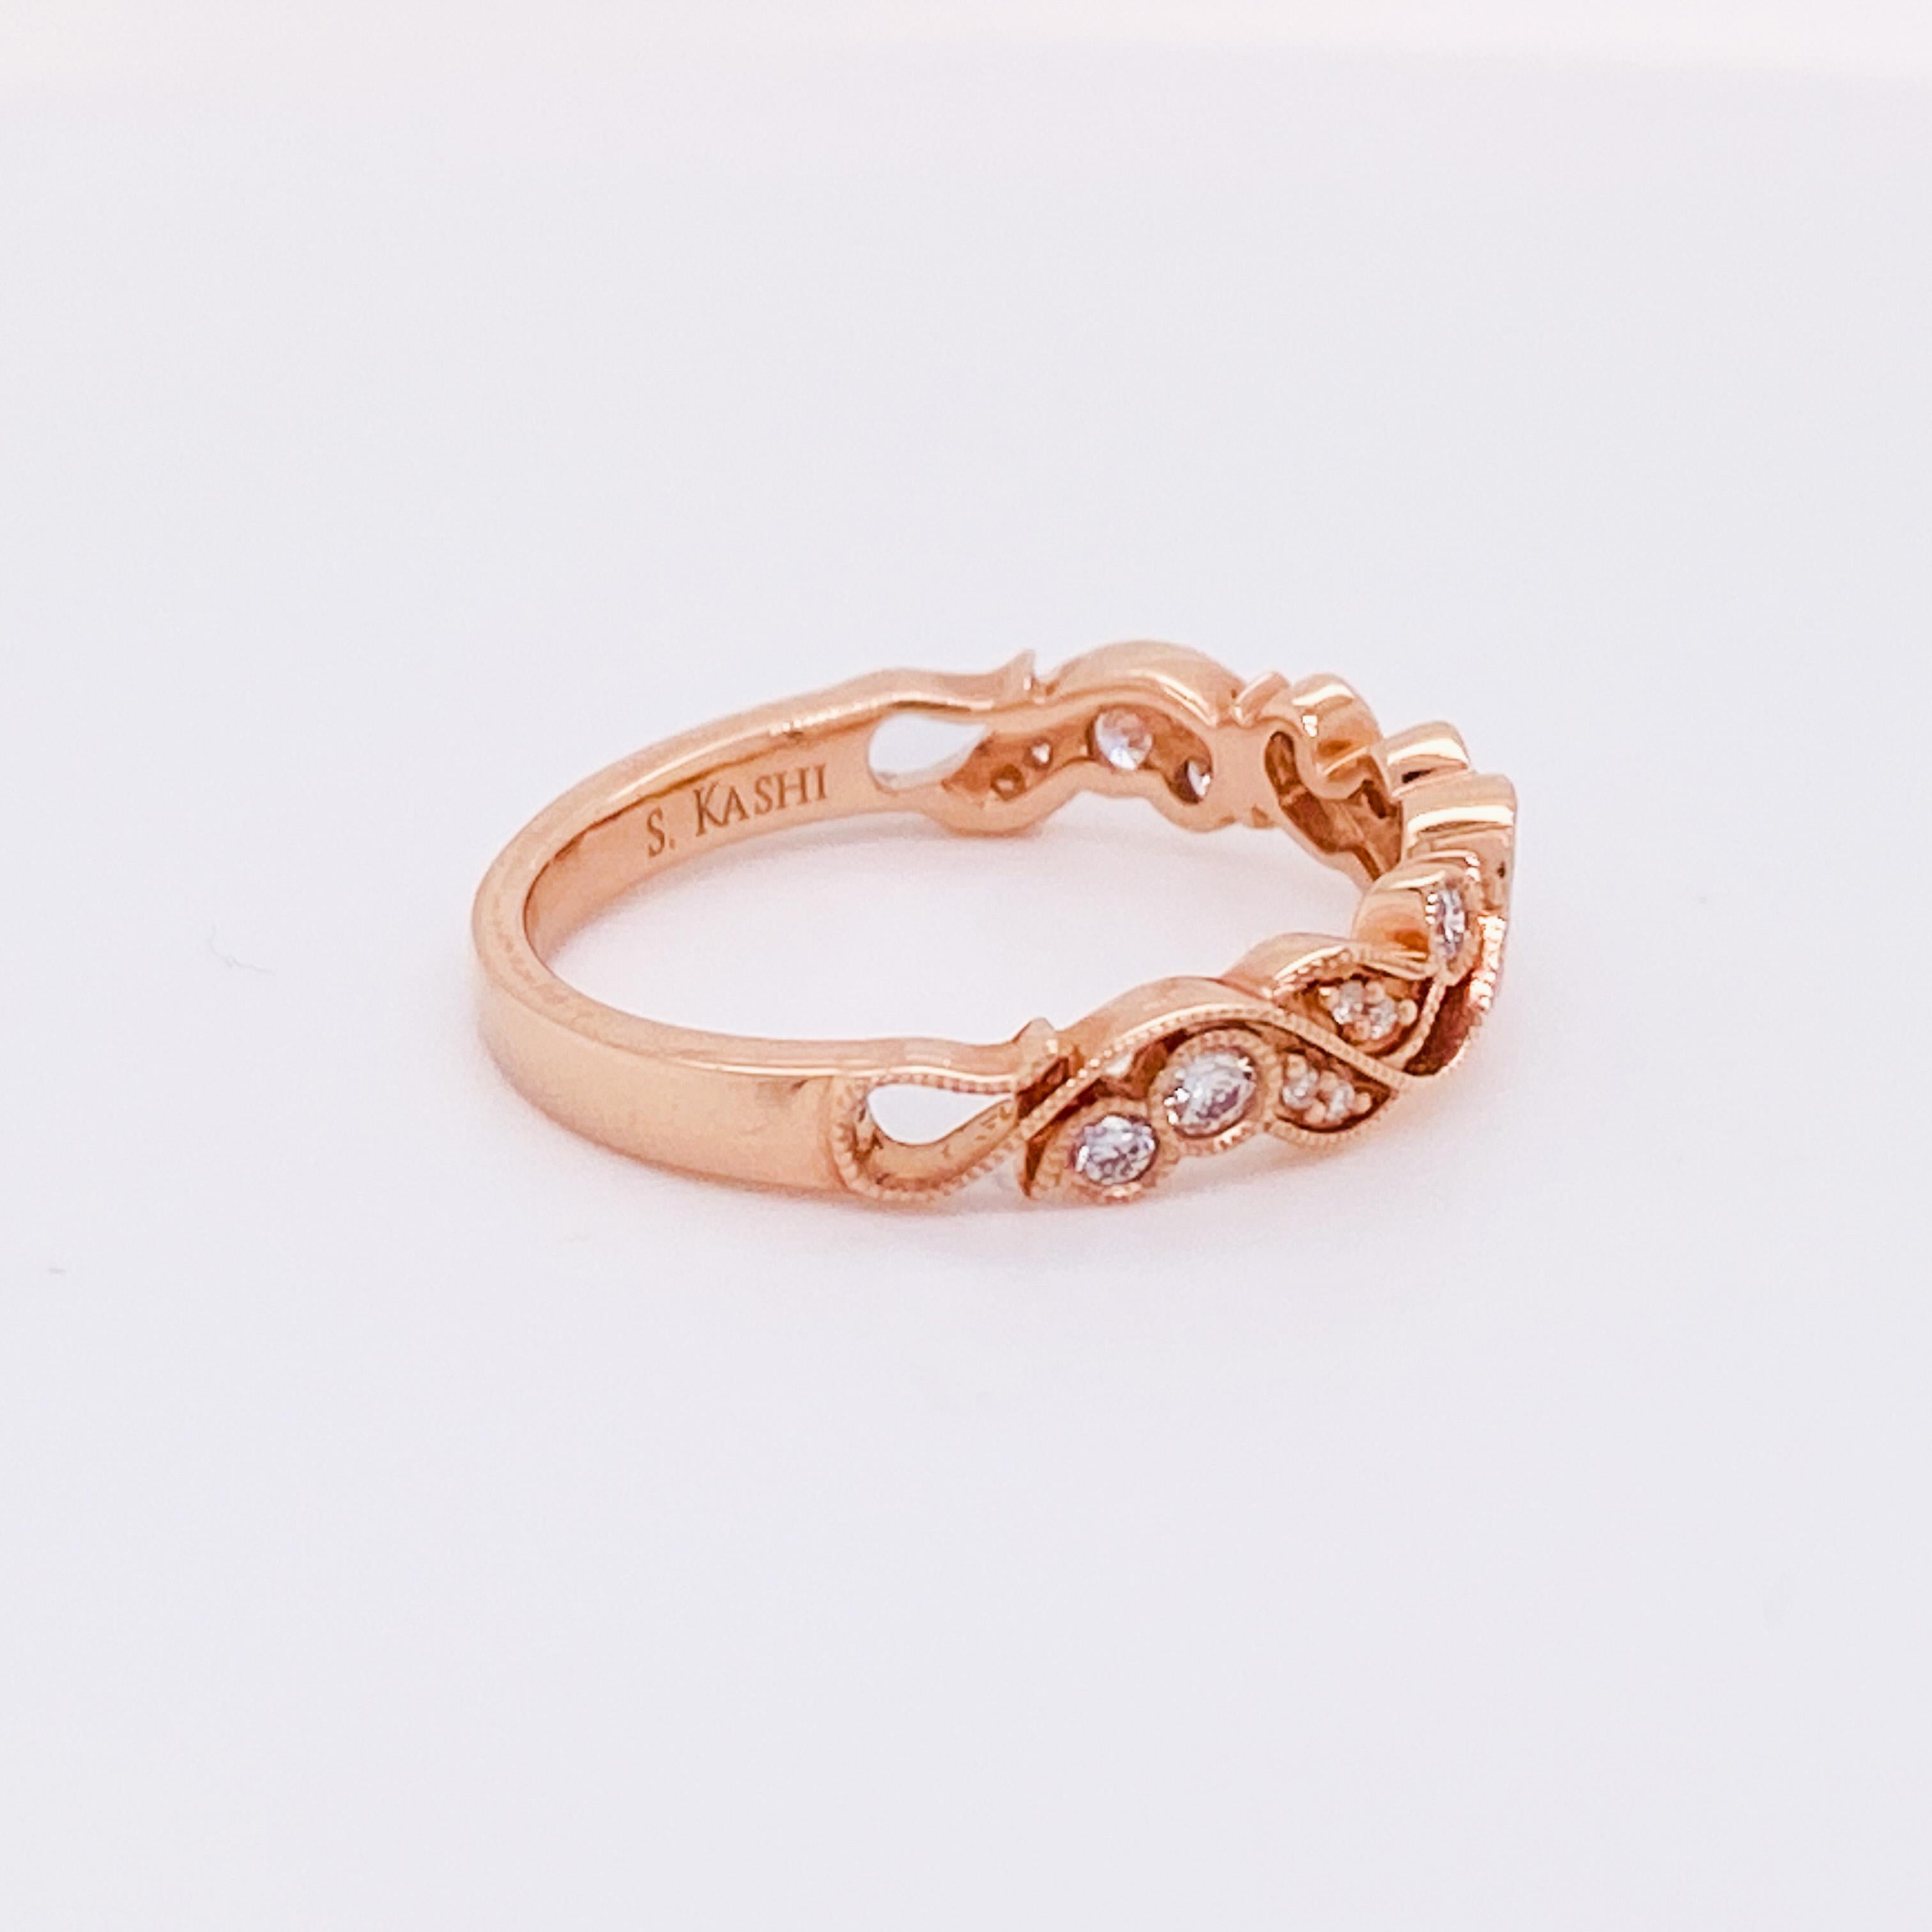 For Sale:  Leaf and Vine Diamond Ring .16 Carats in Rose Gold Stacking or Wedding Band LV 4